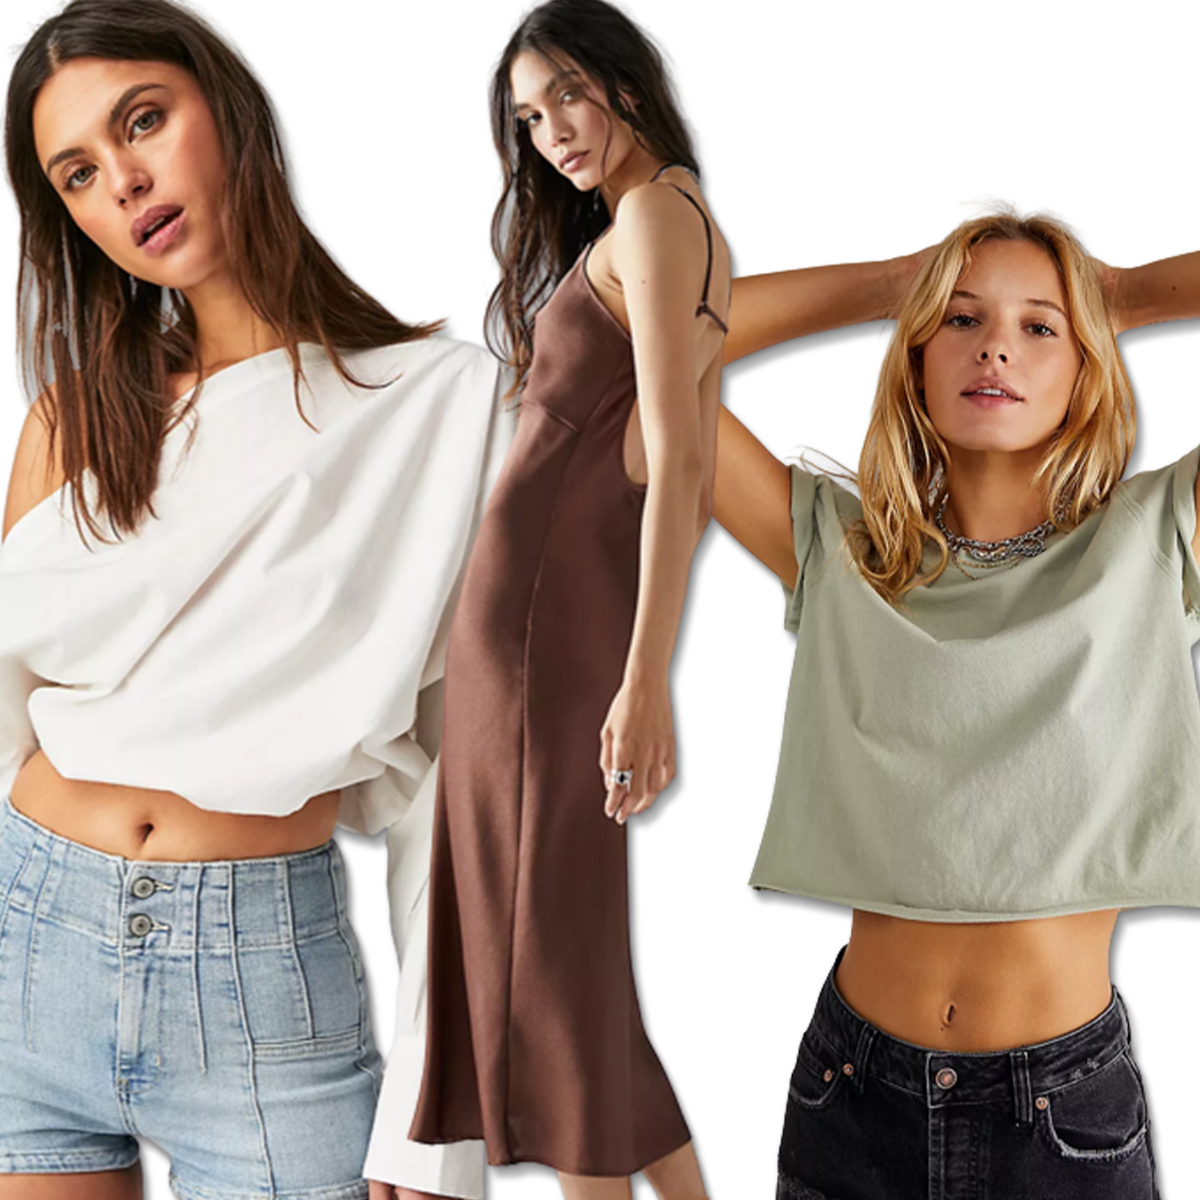 12 Free People Items Every Woman Should Own